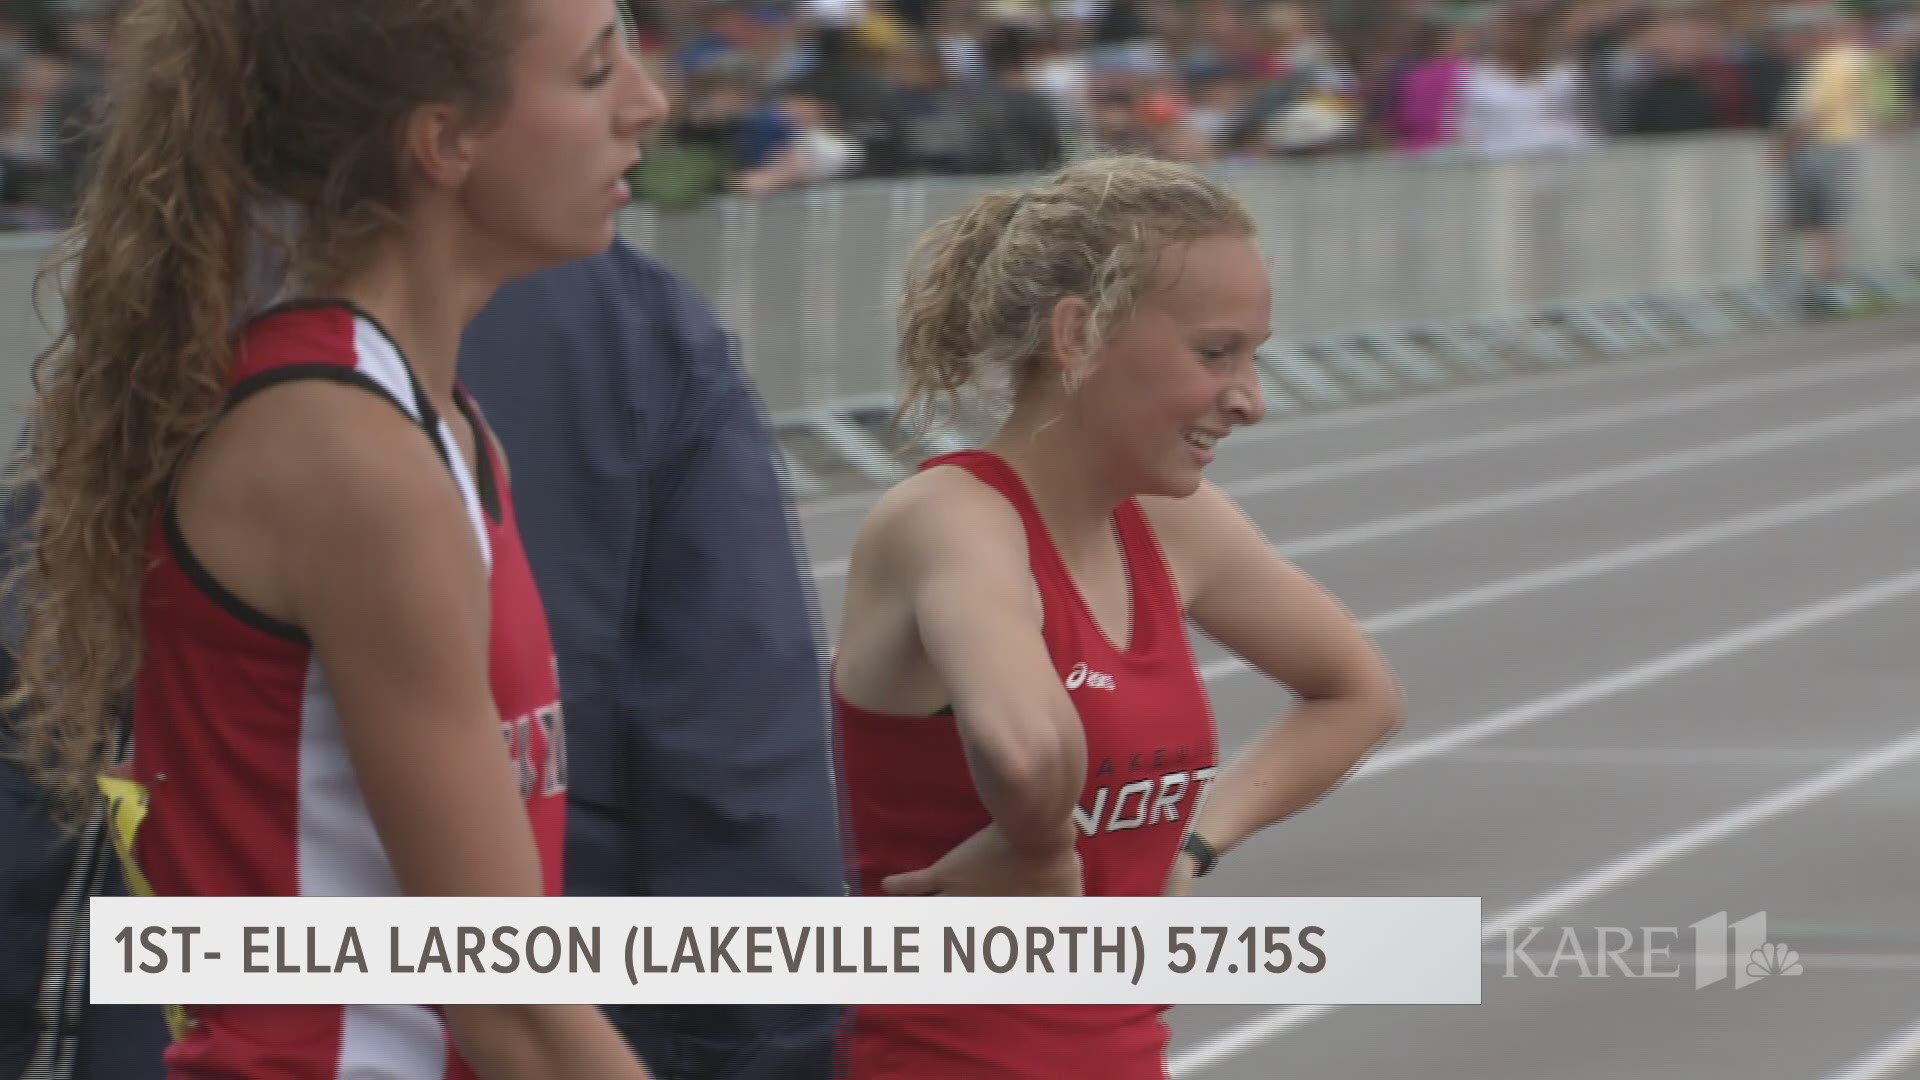 Highlights from the girls races at State Track Saturday morning.